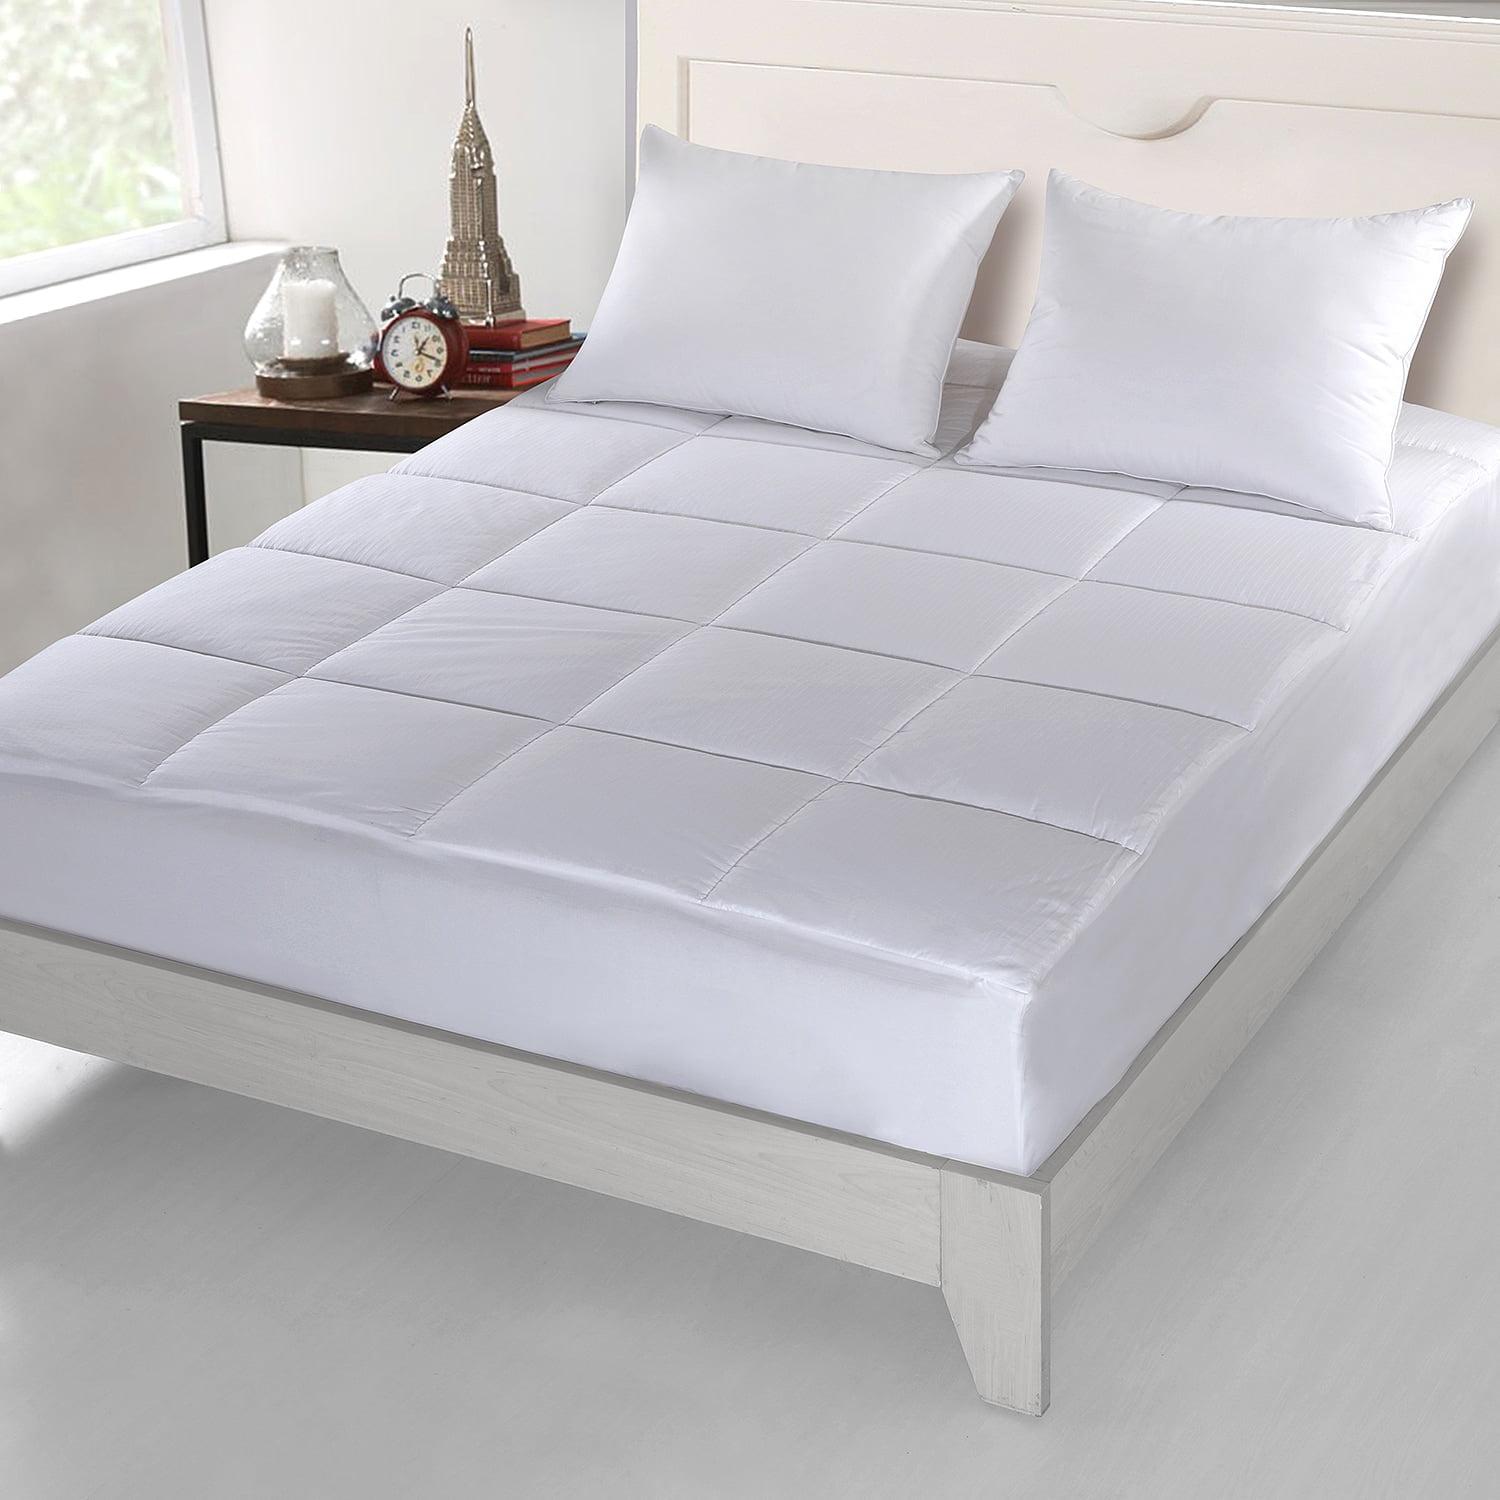 Luxury Hypoallergenic King Featherbed with Cooling 500TC Cotton Cover